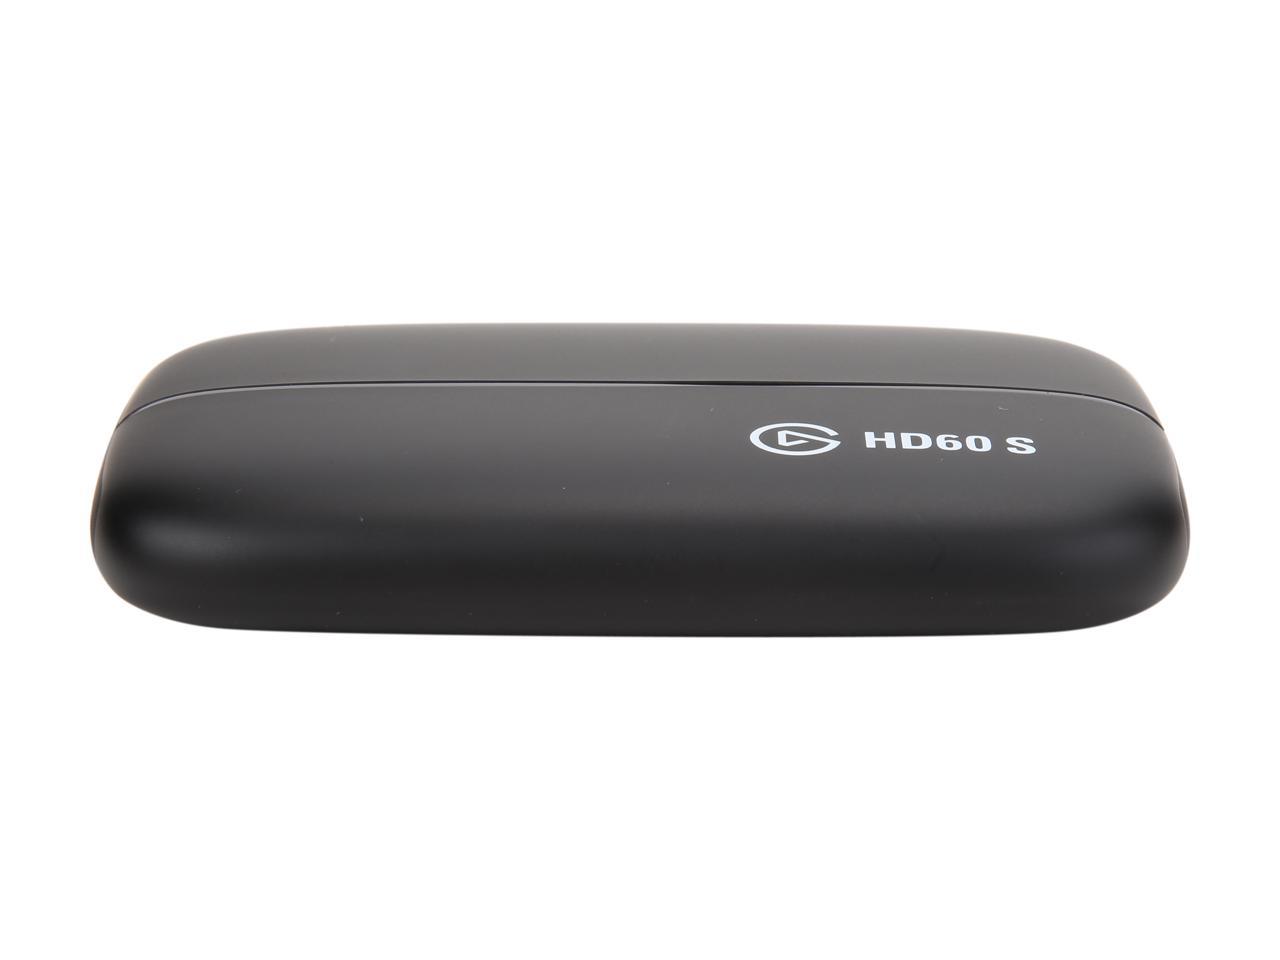 Elgato Game Capture HD60 S - Stream, Record and Share Your Gameplay in 1080p 60 FPS, Superior Low Latency Technology, USB 3.0, For PS4, Xbox One and Nintendo Switch